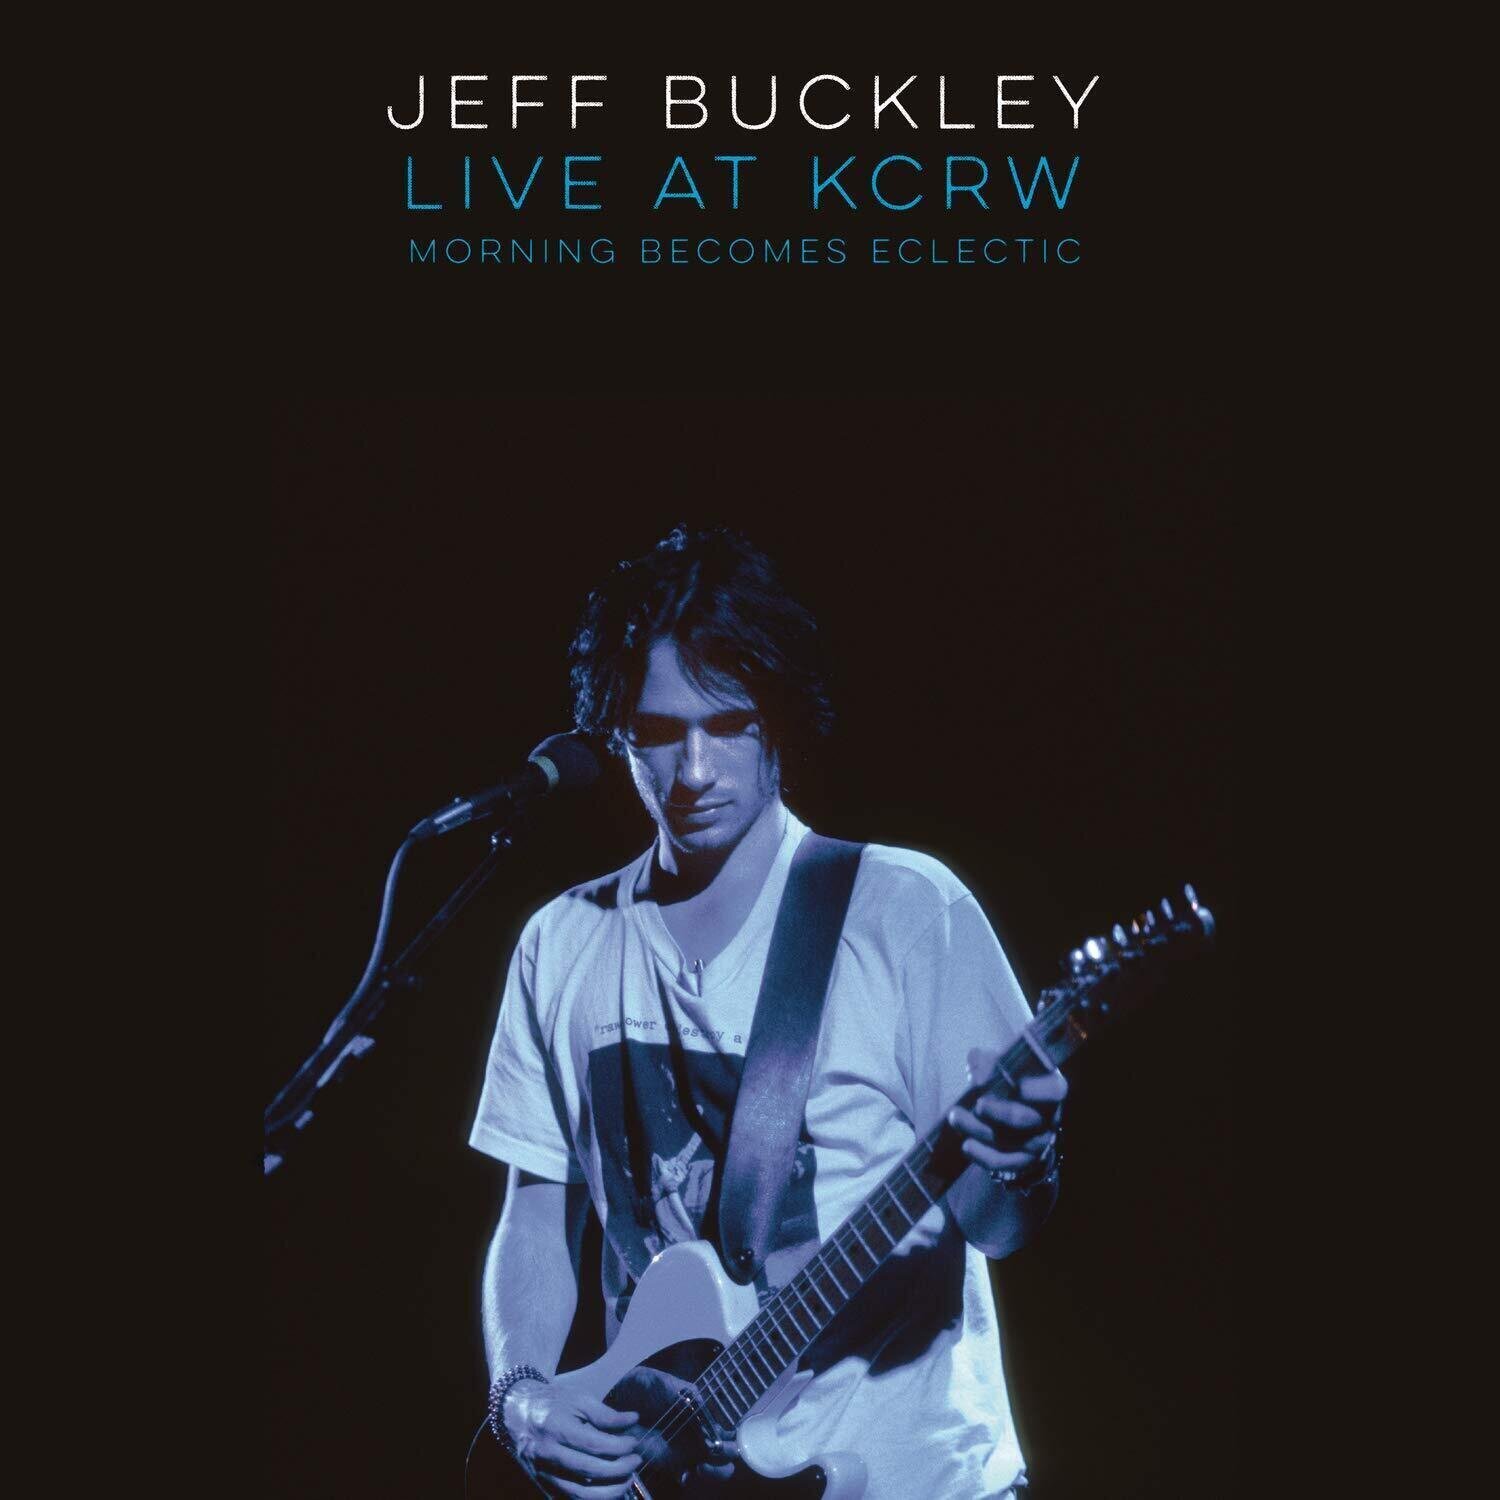 Disco de vinilo Jeff Buckley - Live On KCRW: Morning Becomes Eclectic (Black Friday Edition) (LP)